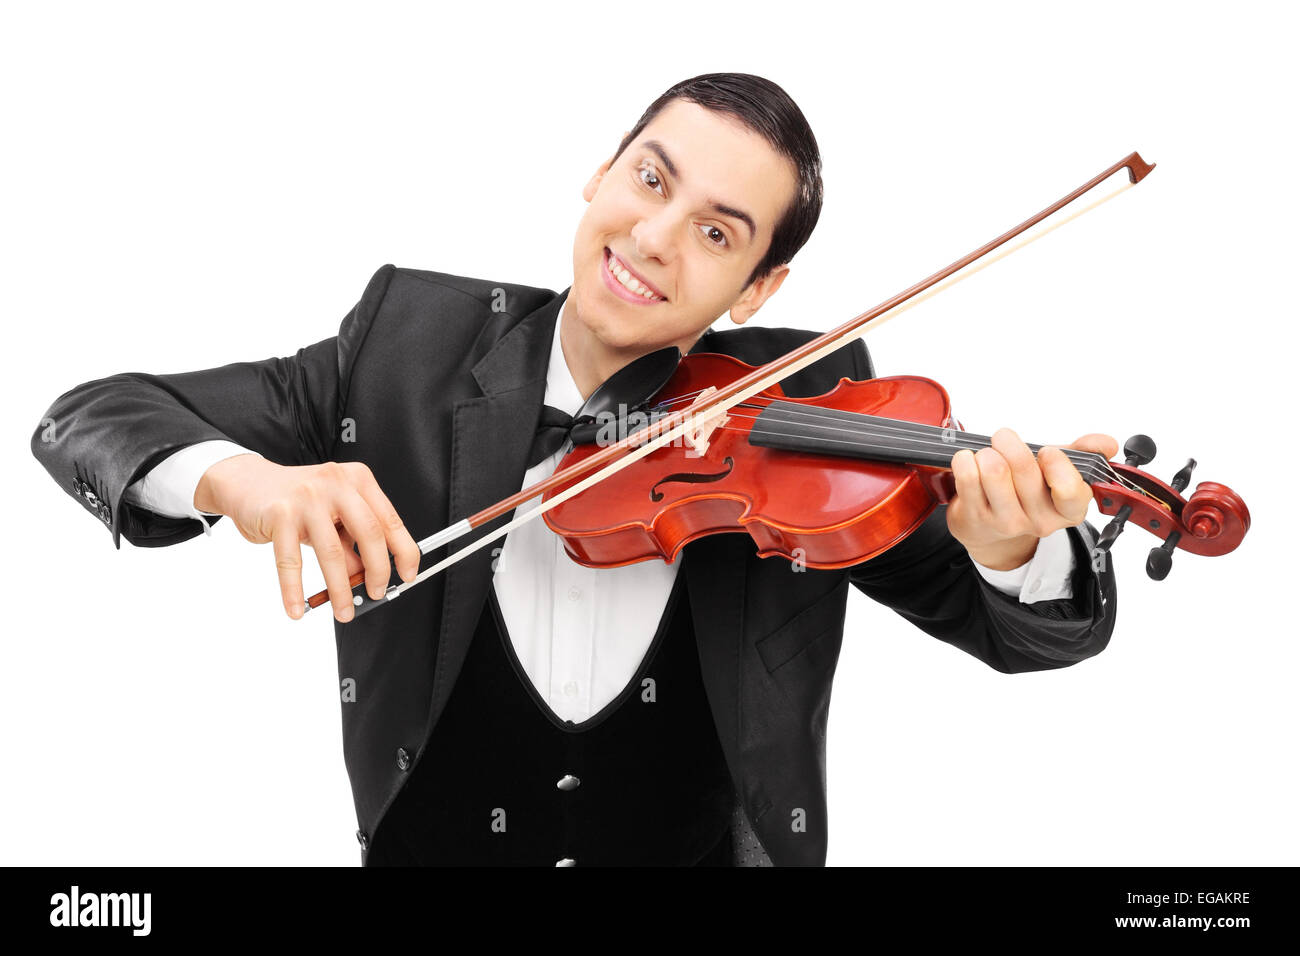 Cheerful violinist playing a violin isolated on white background Stock Photo